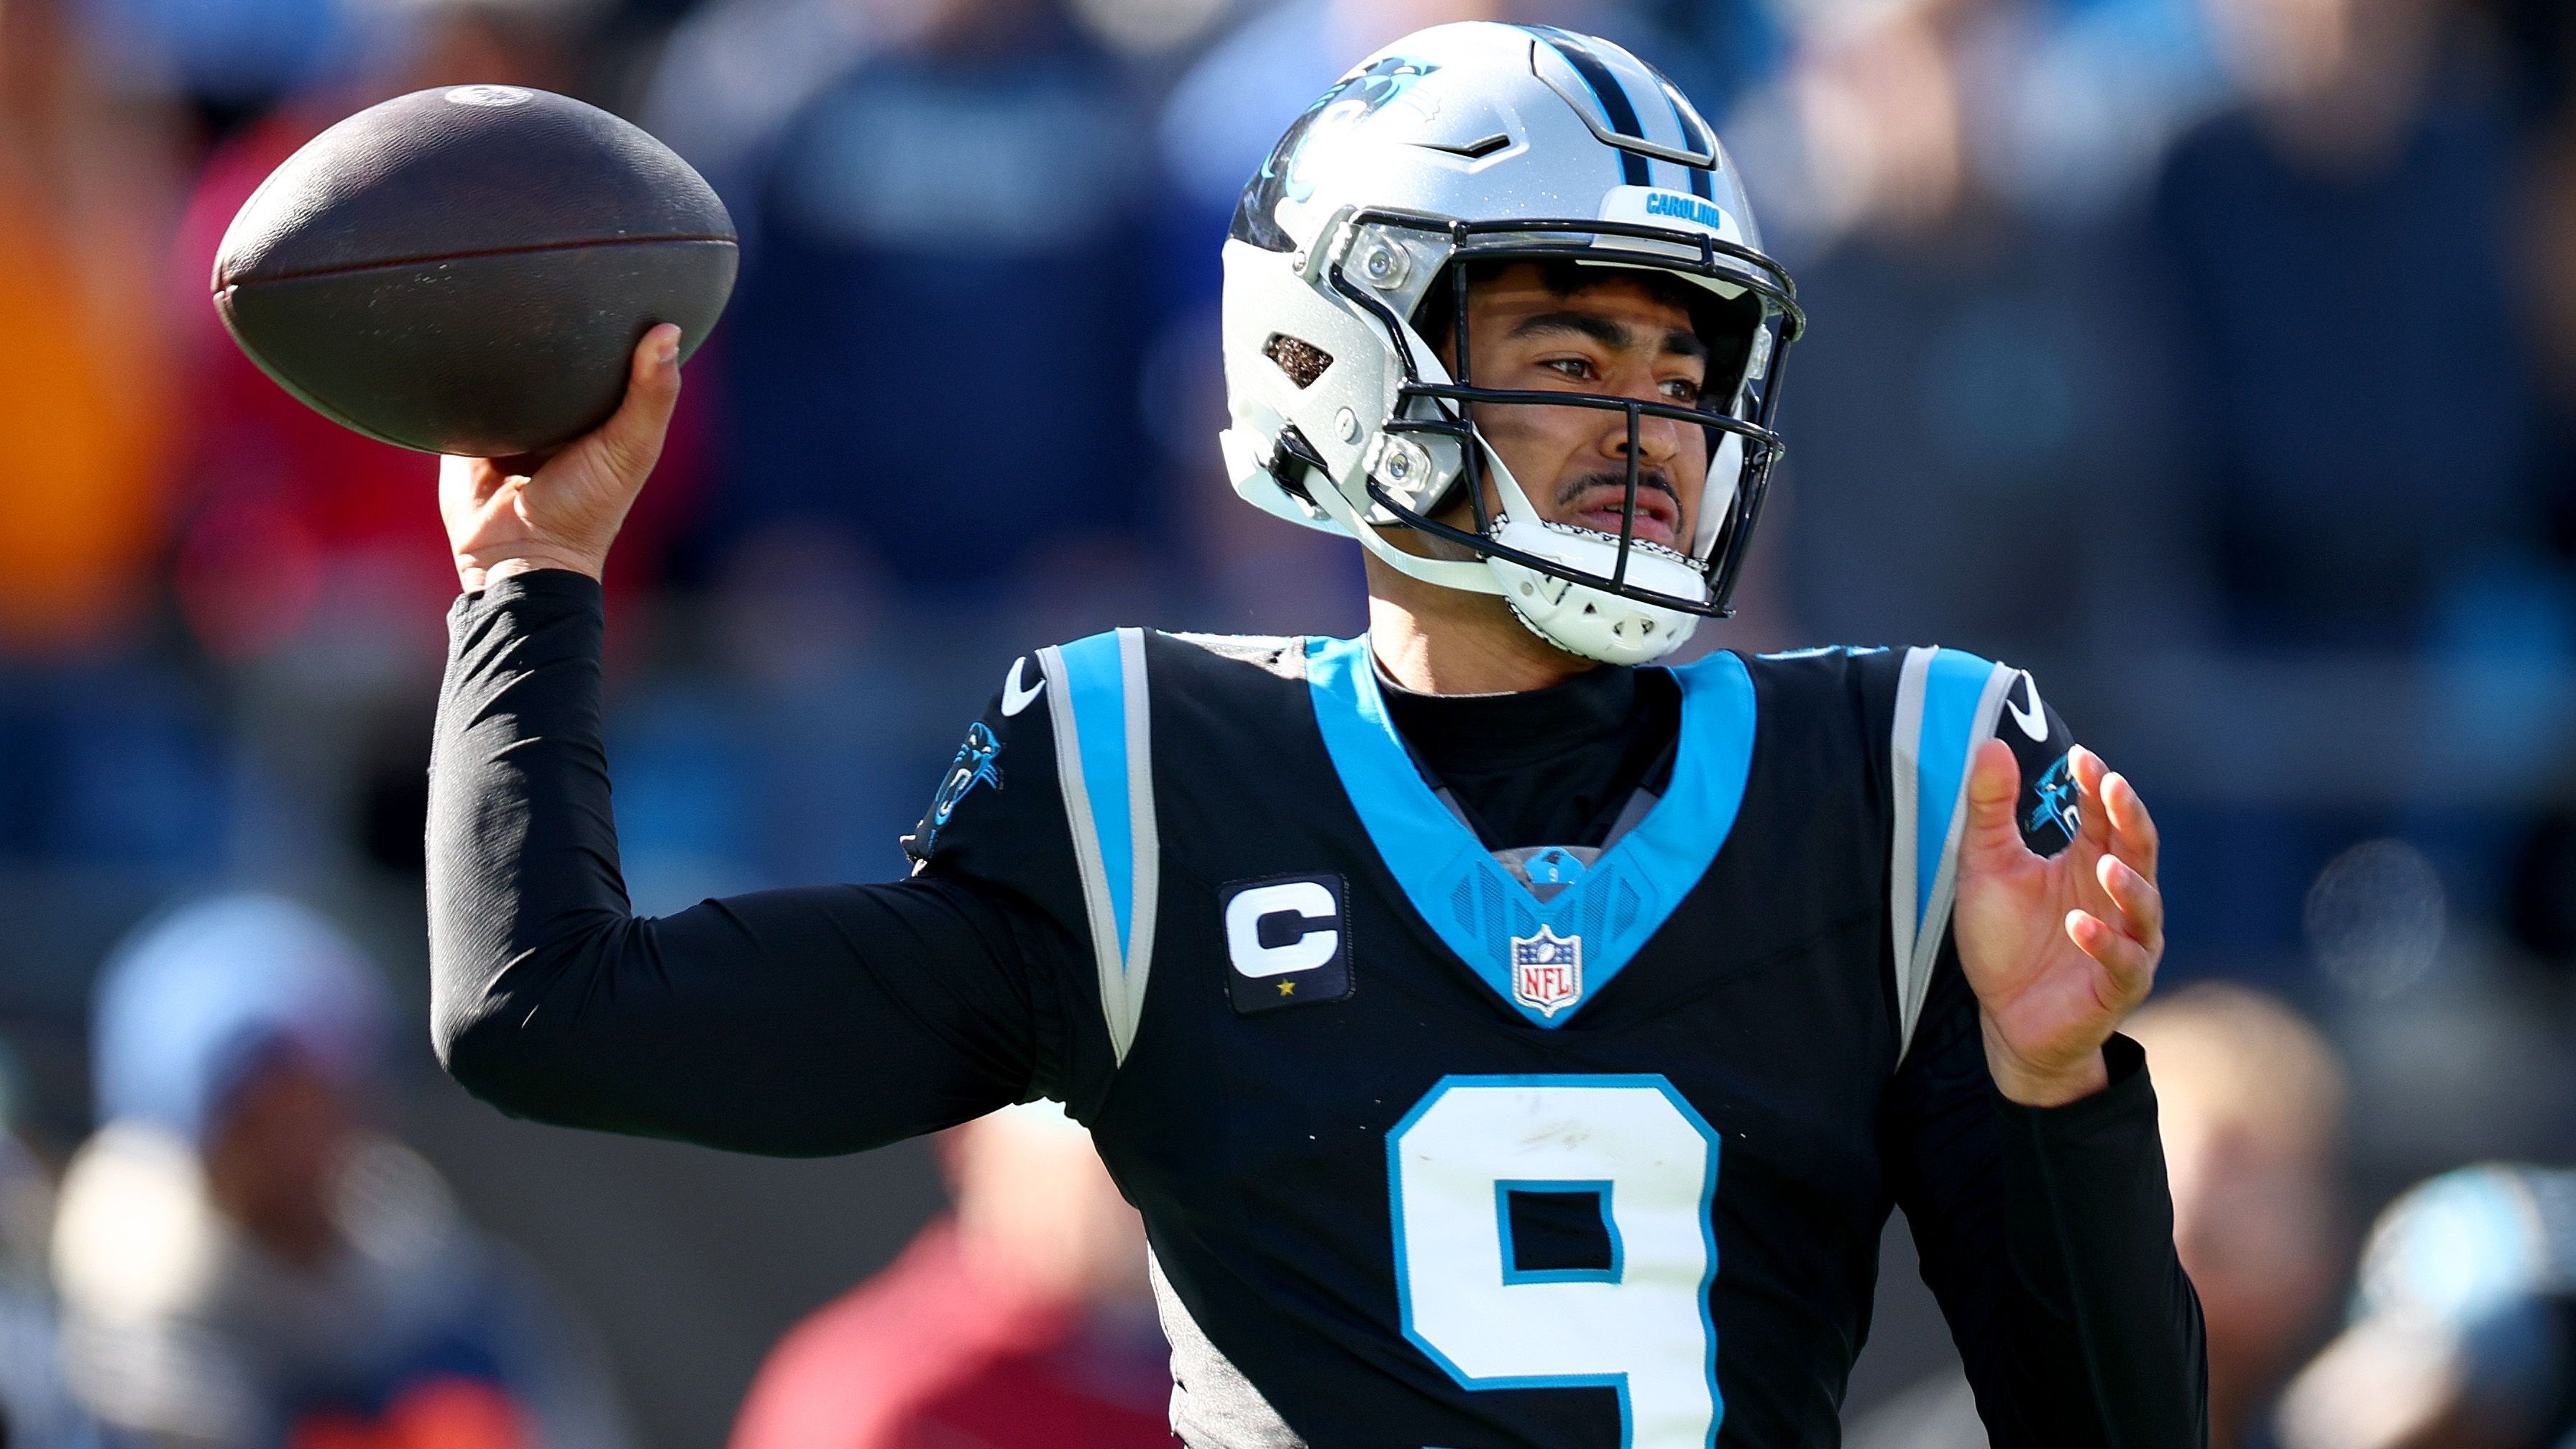 <strong>Platz 9: Bryce Young (Carolina Panthers)</strong><br>Alter: 22<br>Saisons in der NFL: 1<br>Passing-Yards:&nbsp;2,877<br>Passing-Touchdowns:&nbsp;11<br>Interceptions: 10<br>Completion-Rate:&nbsp;59,8%